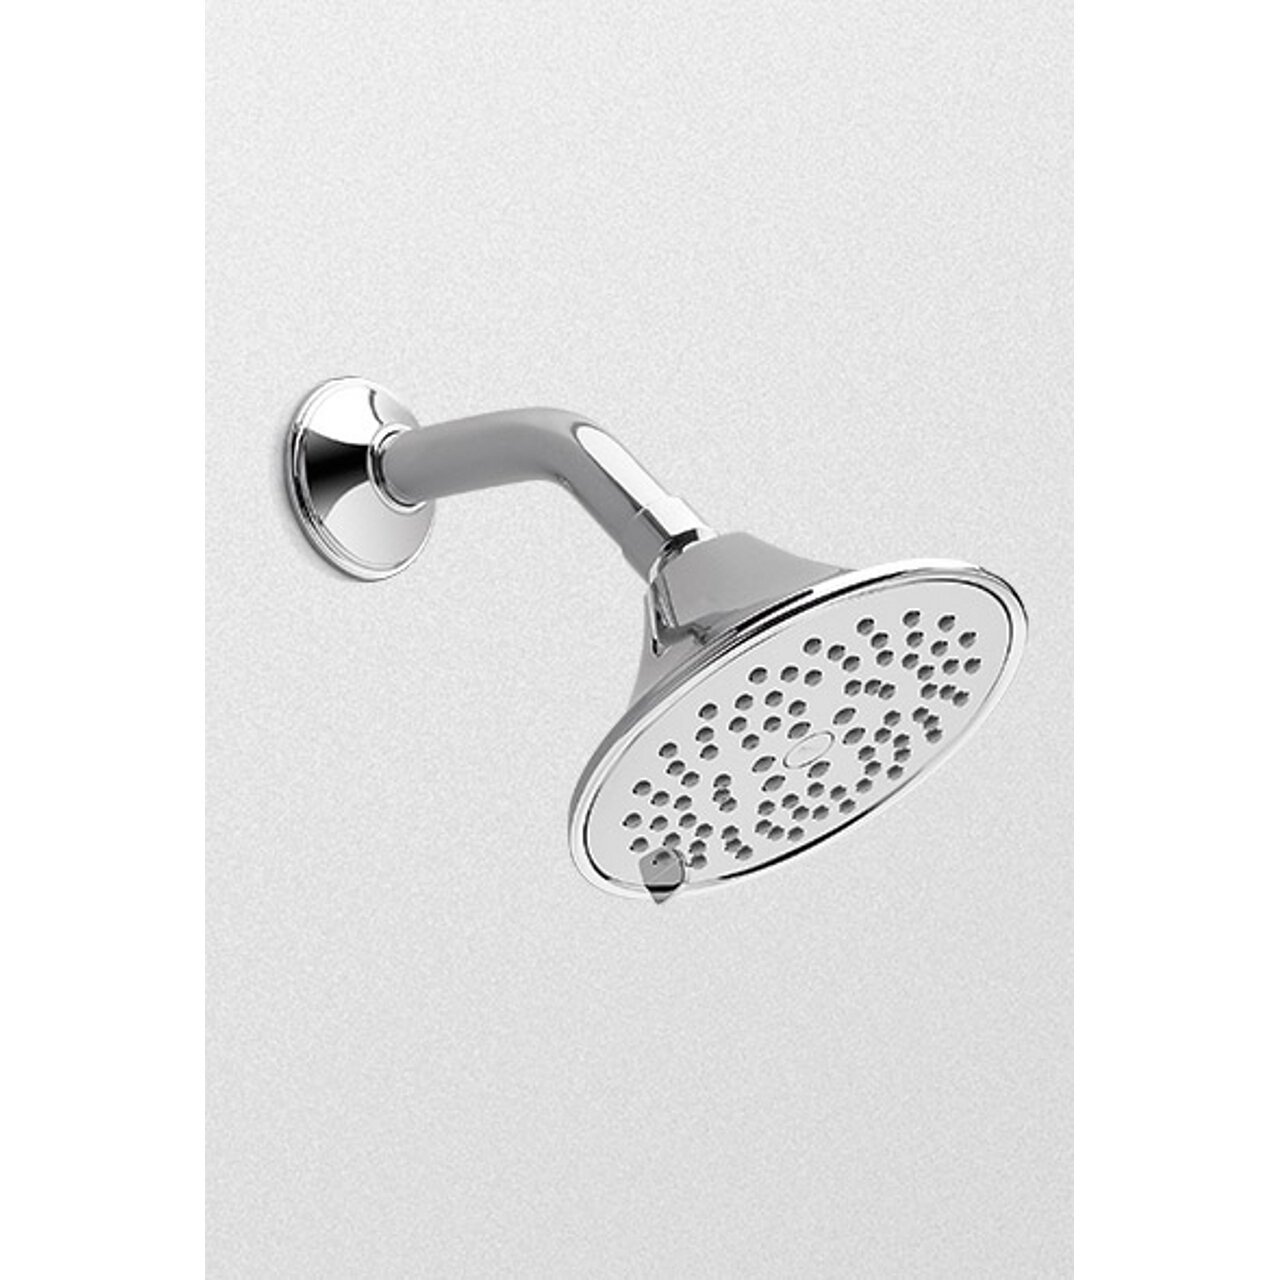 Series A Multi-Function Showerhead In Polished Chrome